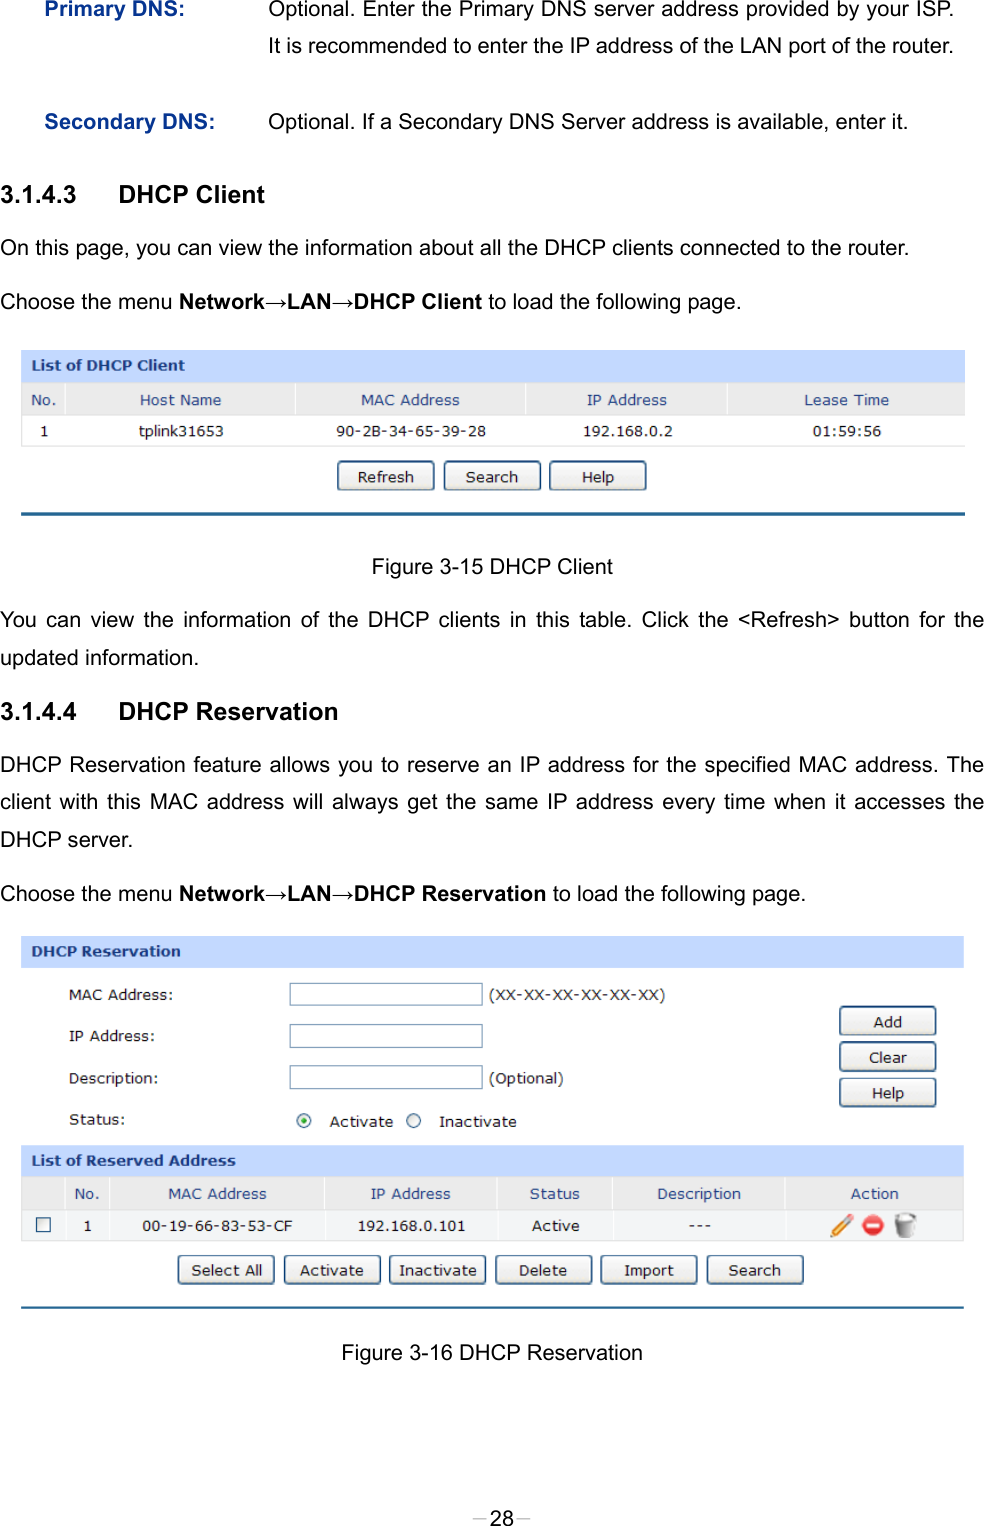  Primary DNS:  Optional. Enter the Primary DNS server address provided by your ISP. It is recommended to enter the IP address of the LAN port of the router. Secondary DNS:  Optional. If a Secondary DNS Server address is available, enter it. 3.1.4.3 DHCP Client On this page, you can view the information about all the DHCP clients connected to the router. Choose the menu Network→LAN→DHCP Client to load the following page.  Figure 3-15 DHCP Client You can view the information of the DHCP clients in this table. Click  the  &lt;Refresh&gt; button for the updated information. 3.1.4.4 DHCP Reservation DHCP Reservation feature allows you to reserve an IP address for the specified MAC address. The client with this MAC address will always get the same IP address every time when it accesses the DHCP server. Choose the menu Network→LAN→DHCP Reservation to load the following page.  Figure 3-16 DHCP Reservation -28- 